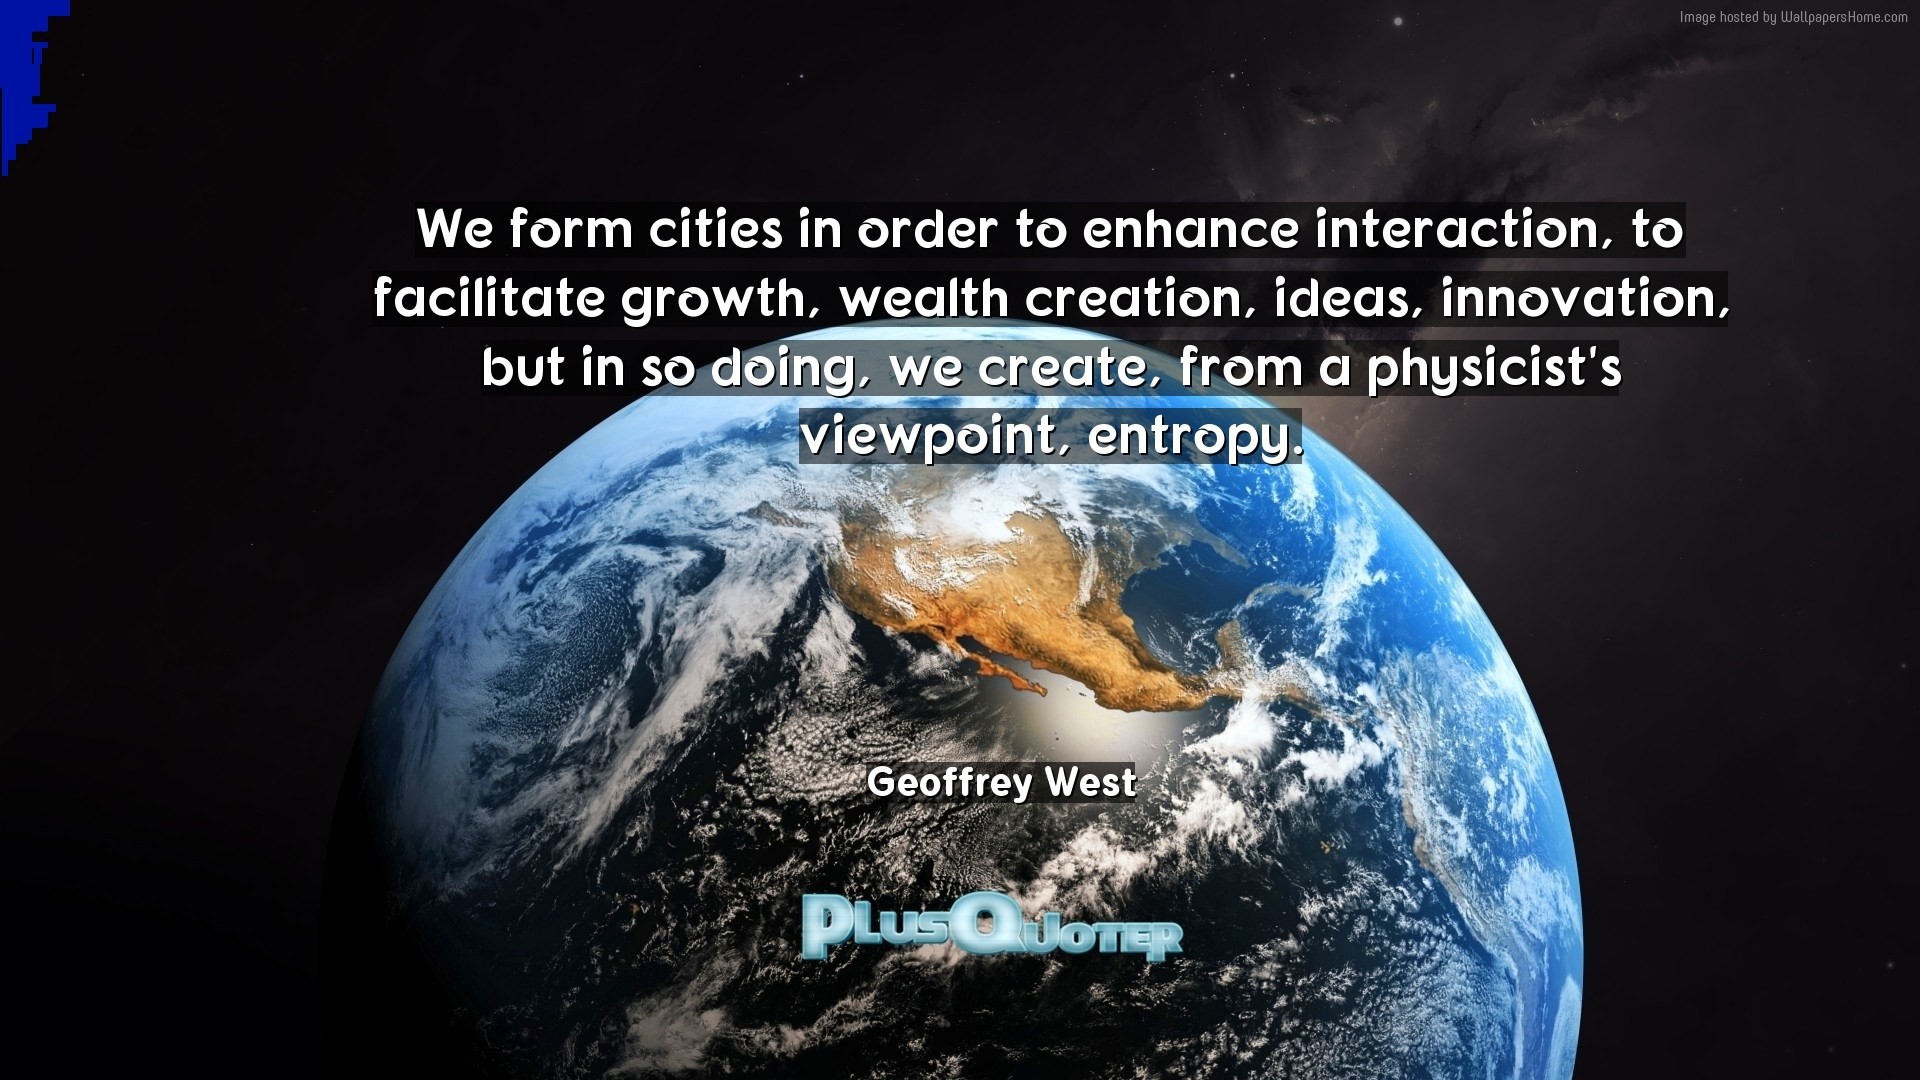 1920x1080 Download Wallpaper with inspirational Quotes- "We form cities in order to  enhance interaction,